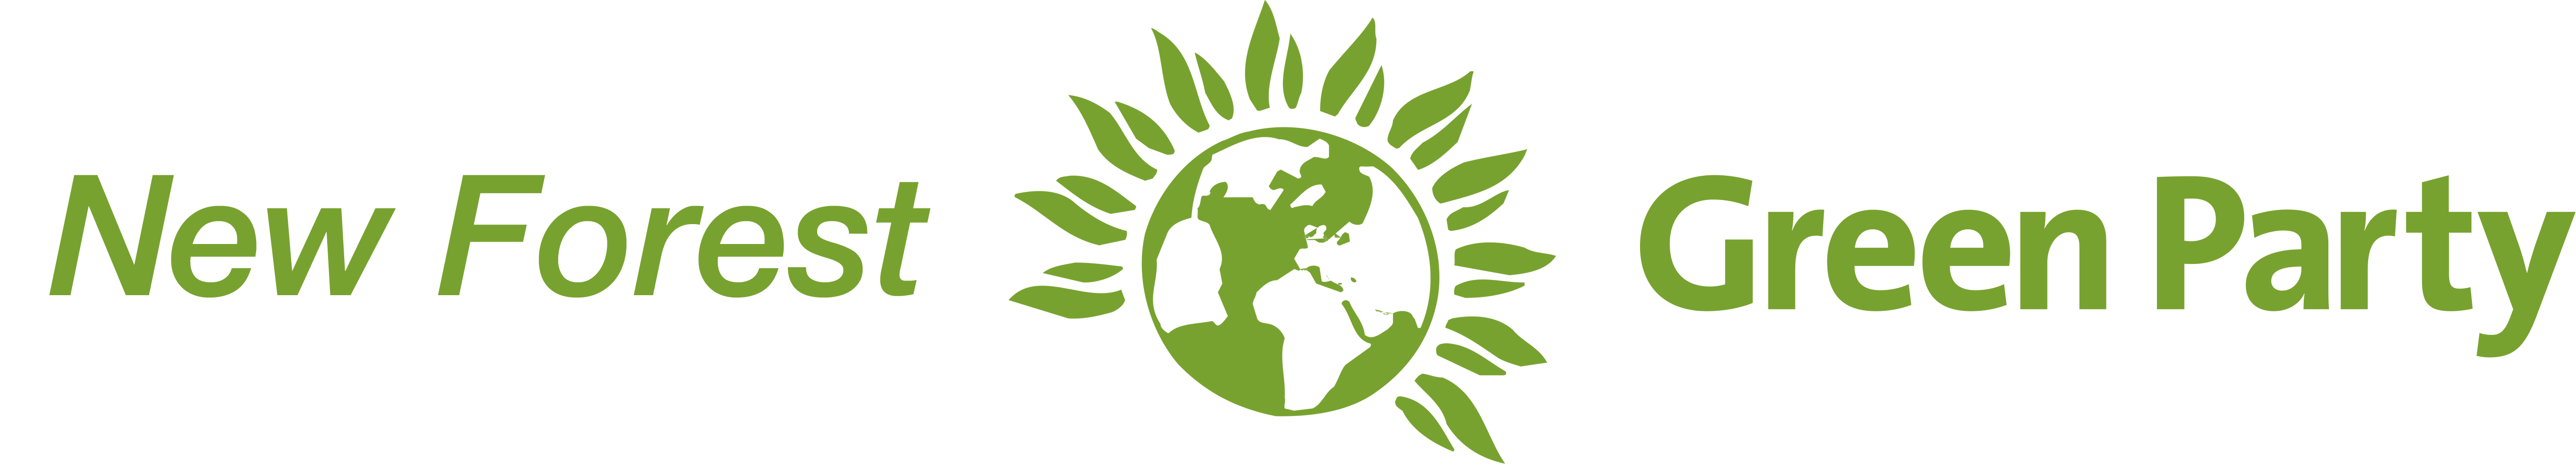 New Forest Green Party